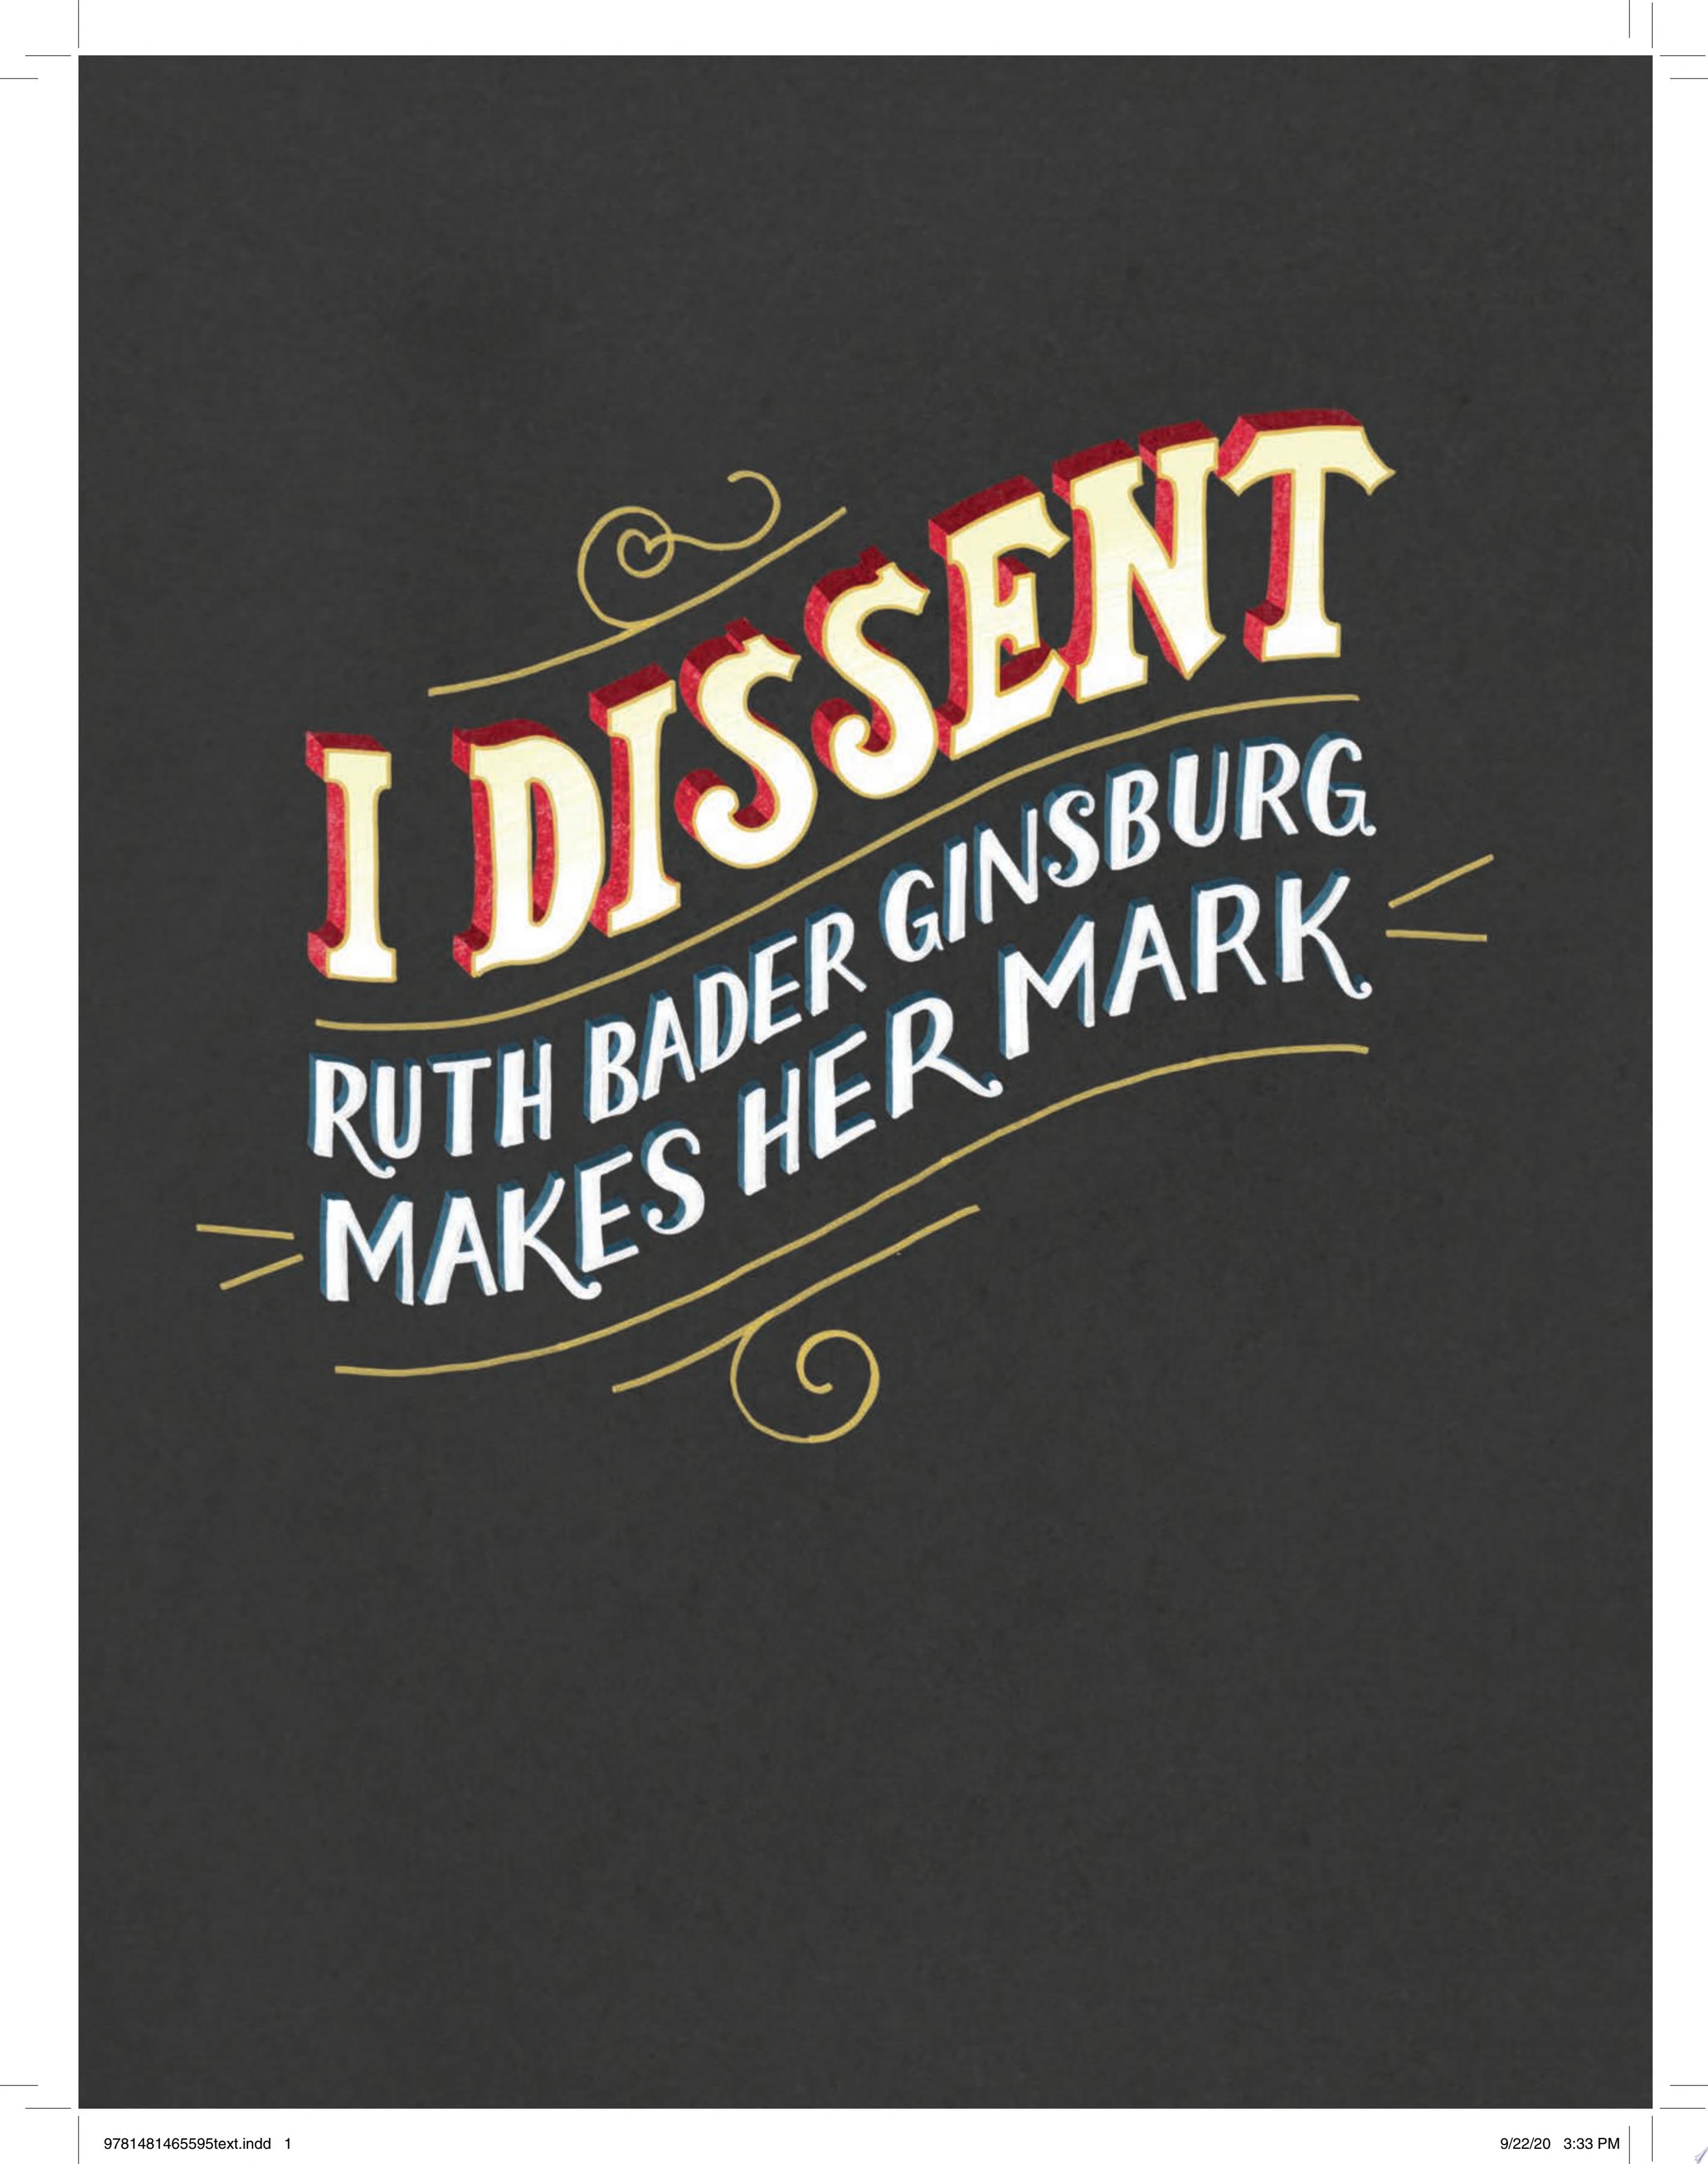 Image for "I Dissent"